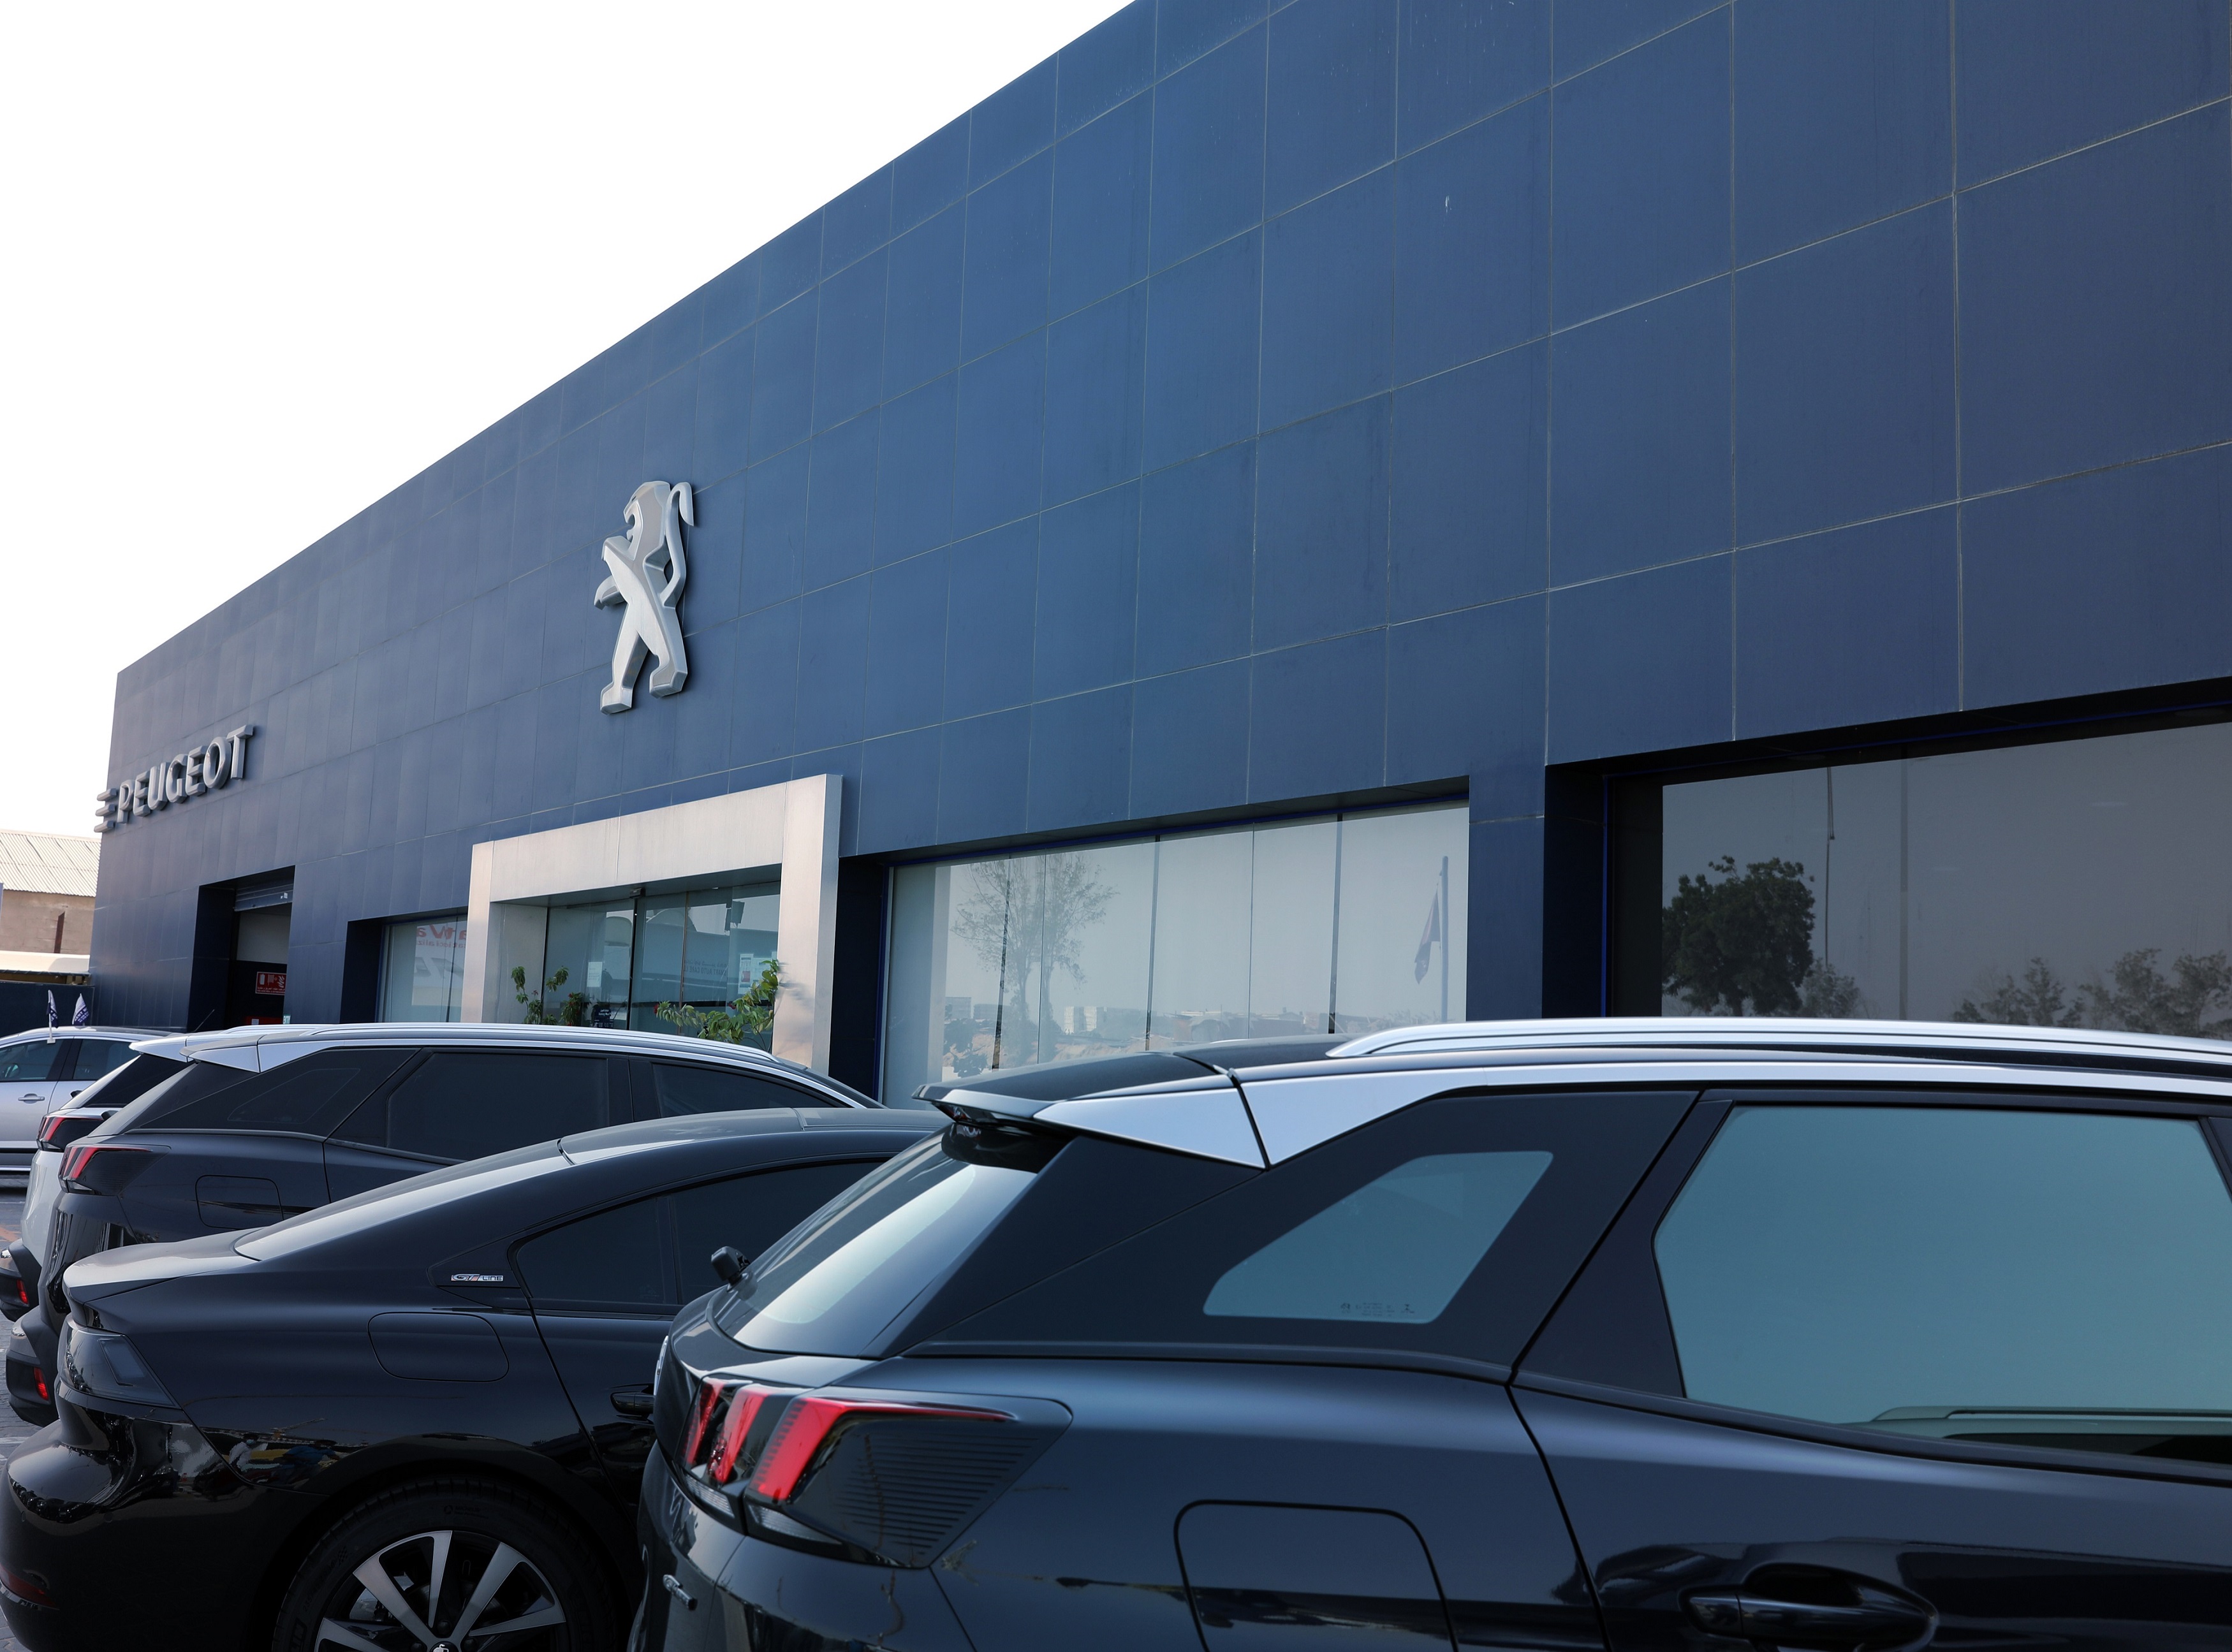 Swaidan Trading’s Peugeot Service Centres Awarded Five-Star Quality Rating by ESMA